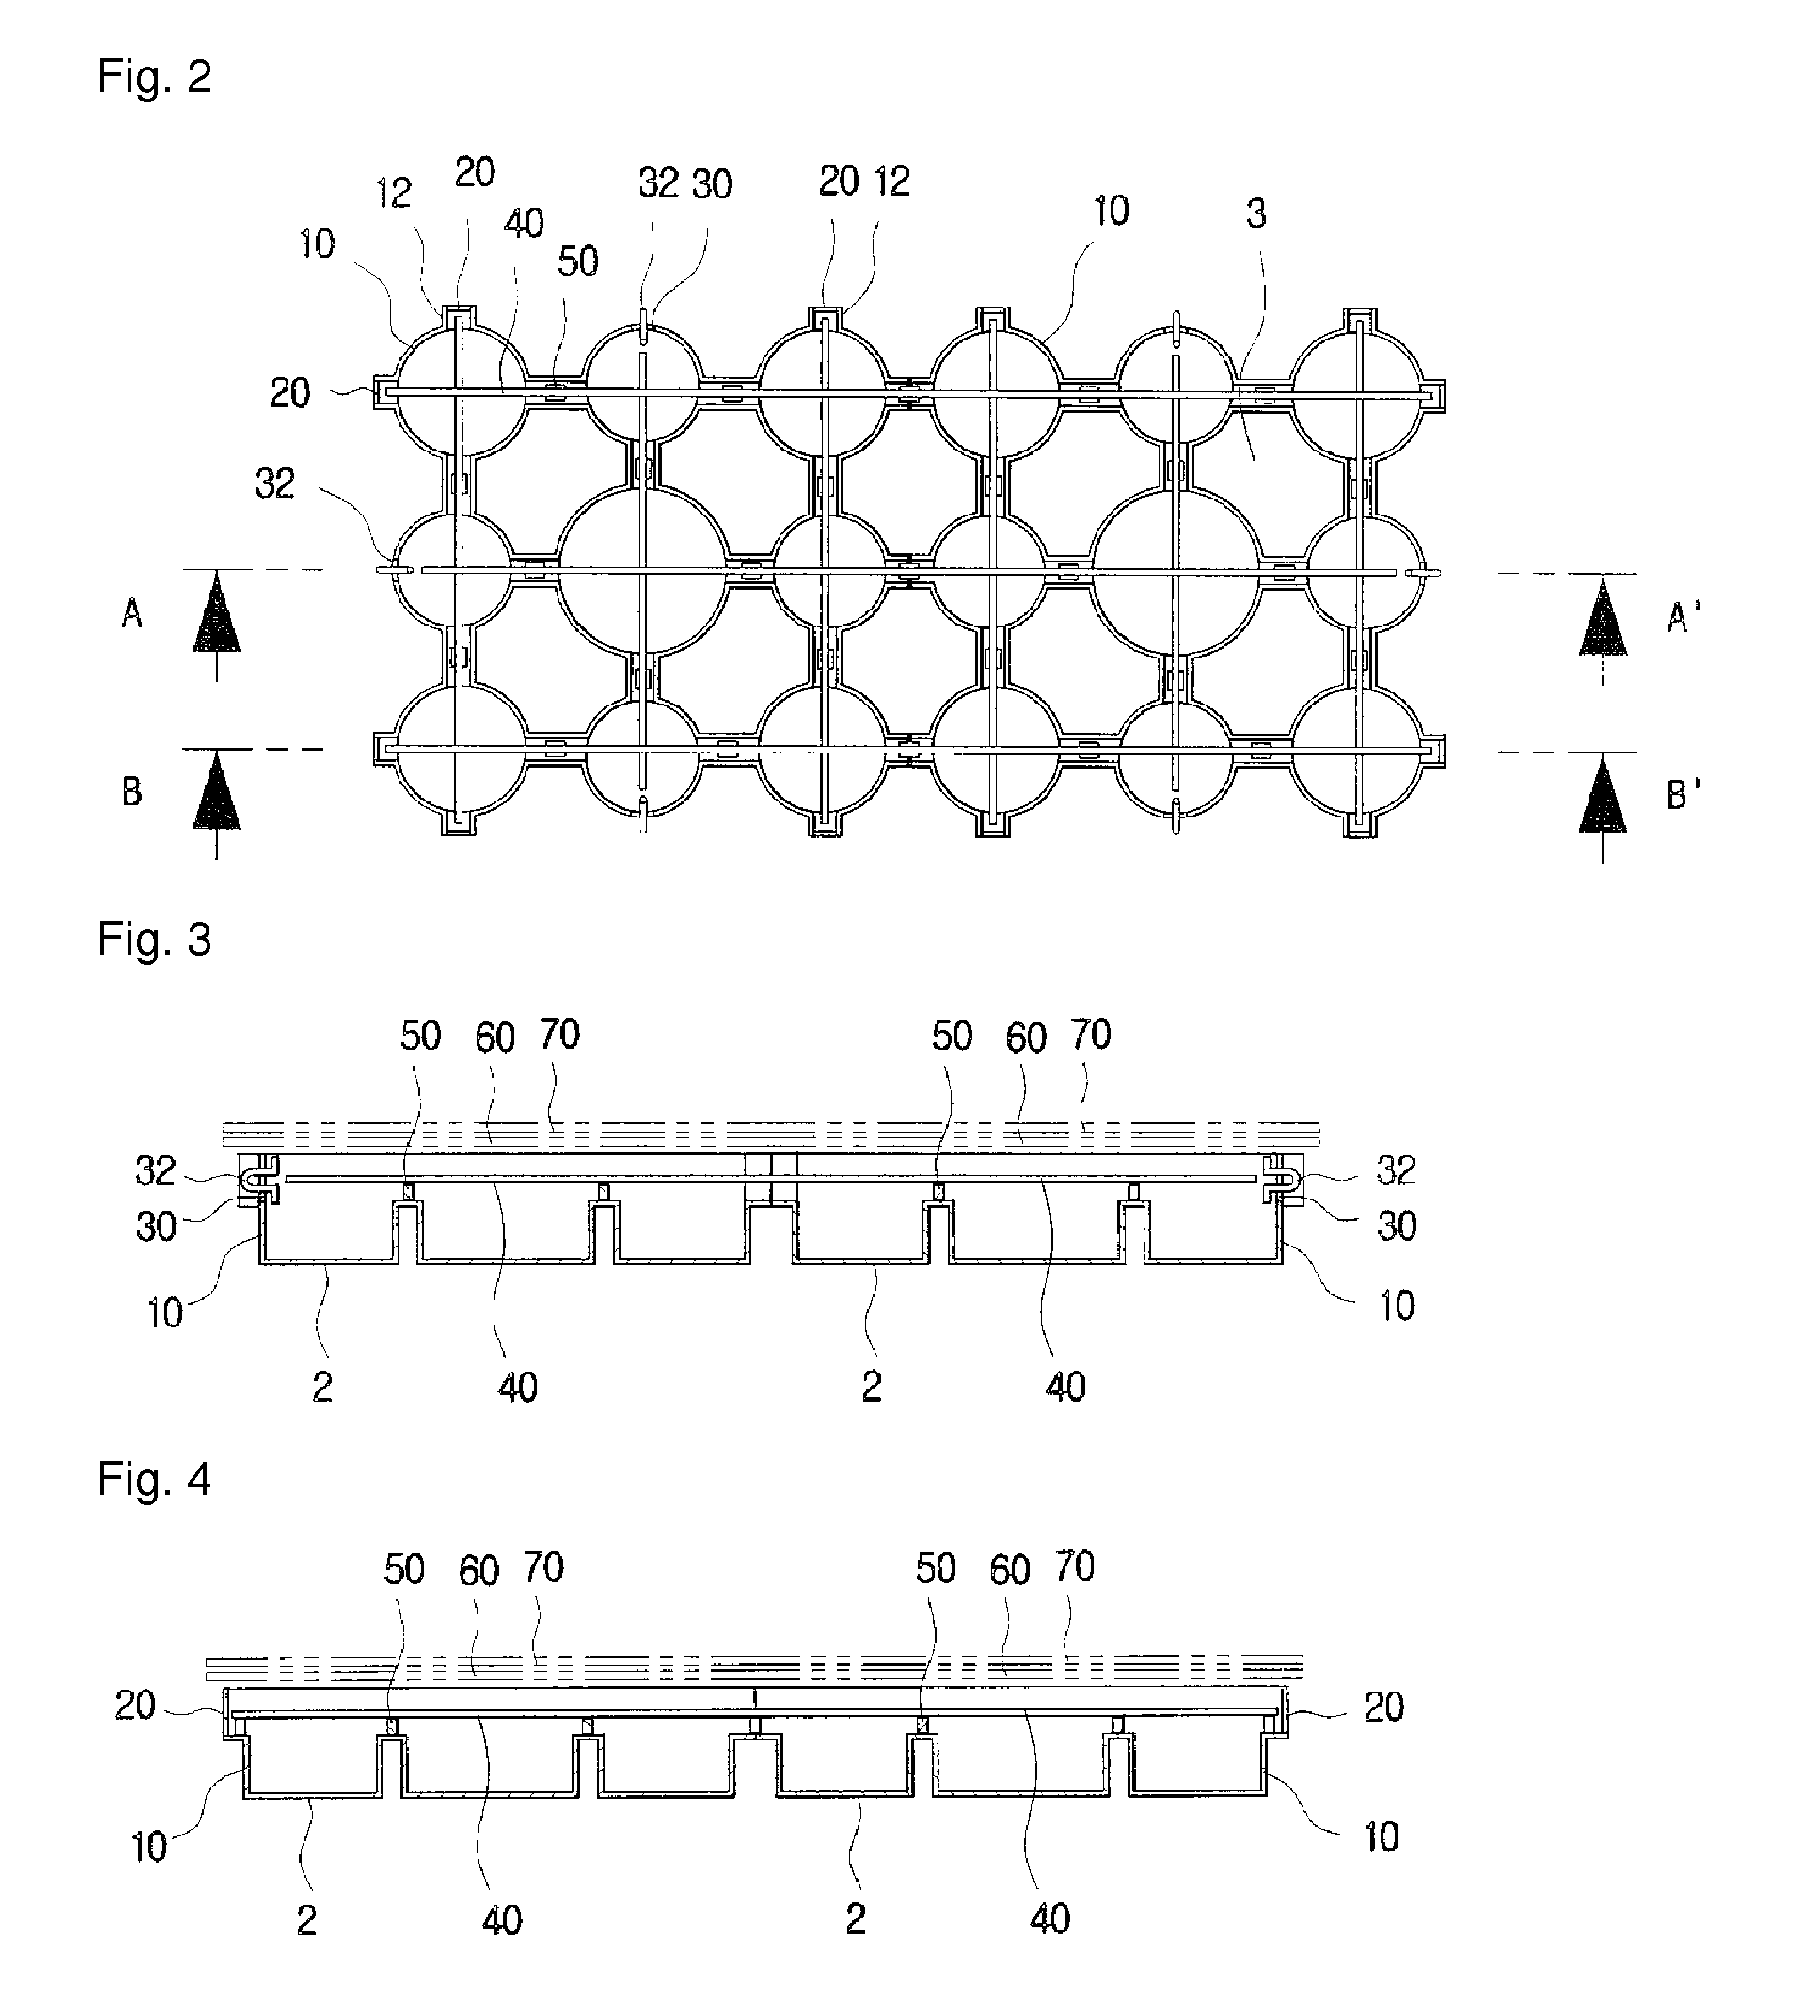 Method of manufacturing watercourse blocks continuously arranged on the spot